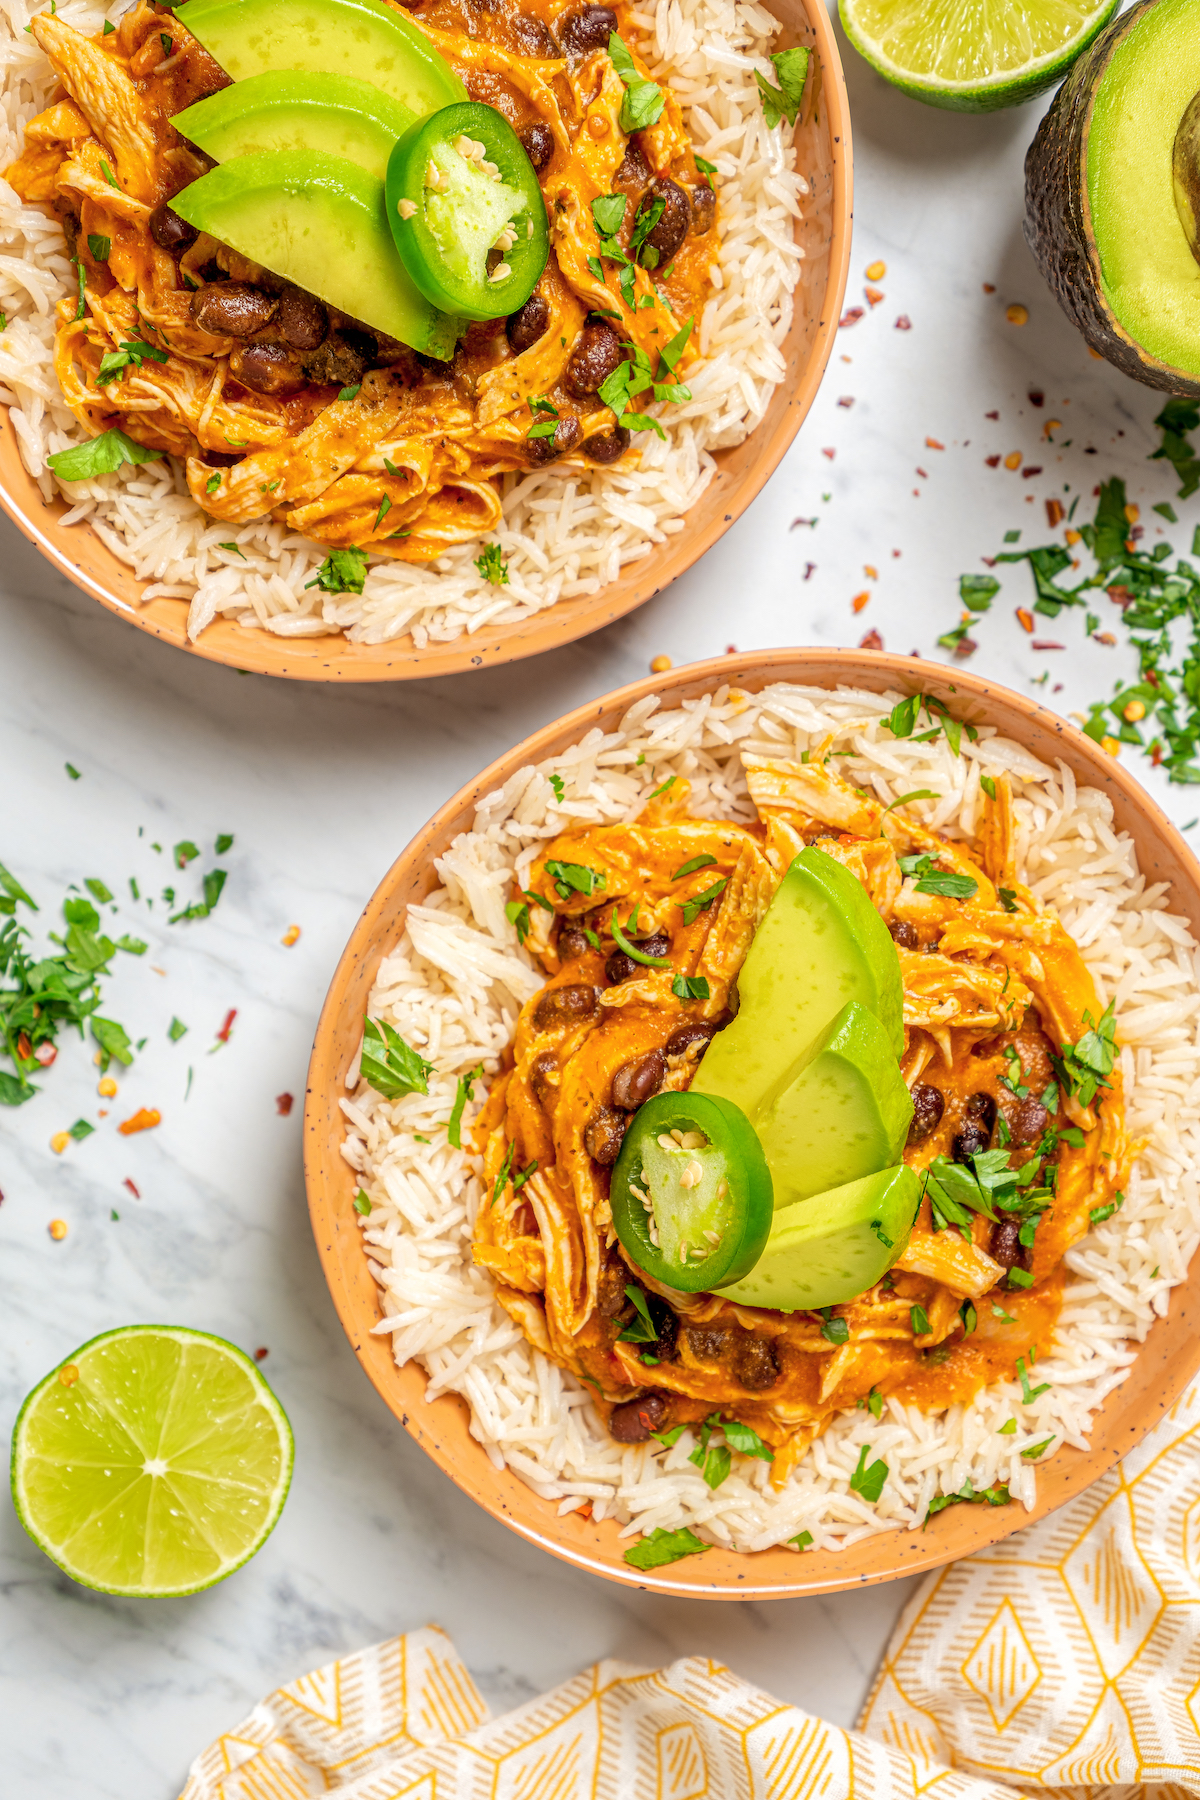 Bowls of rice topped with chicken, beans, avocado, and more.